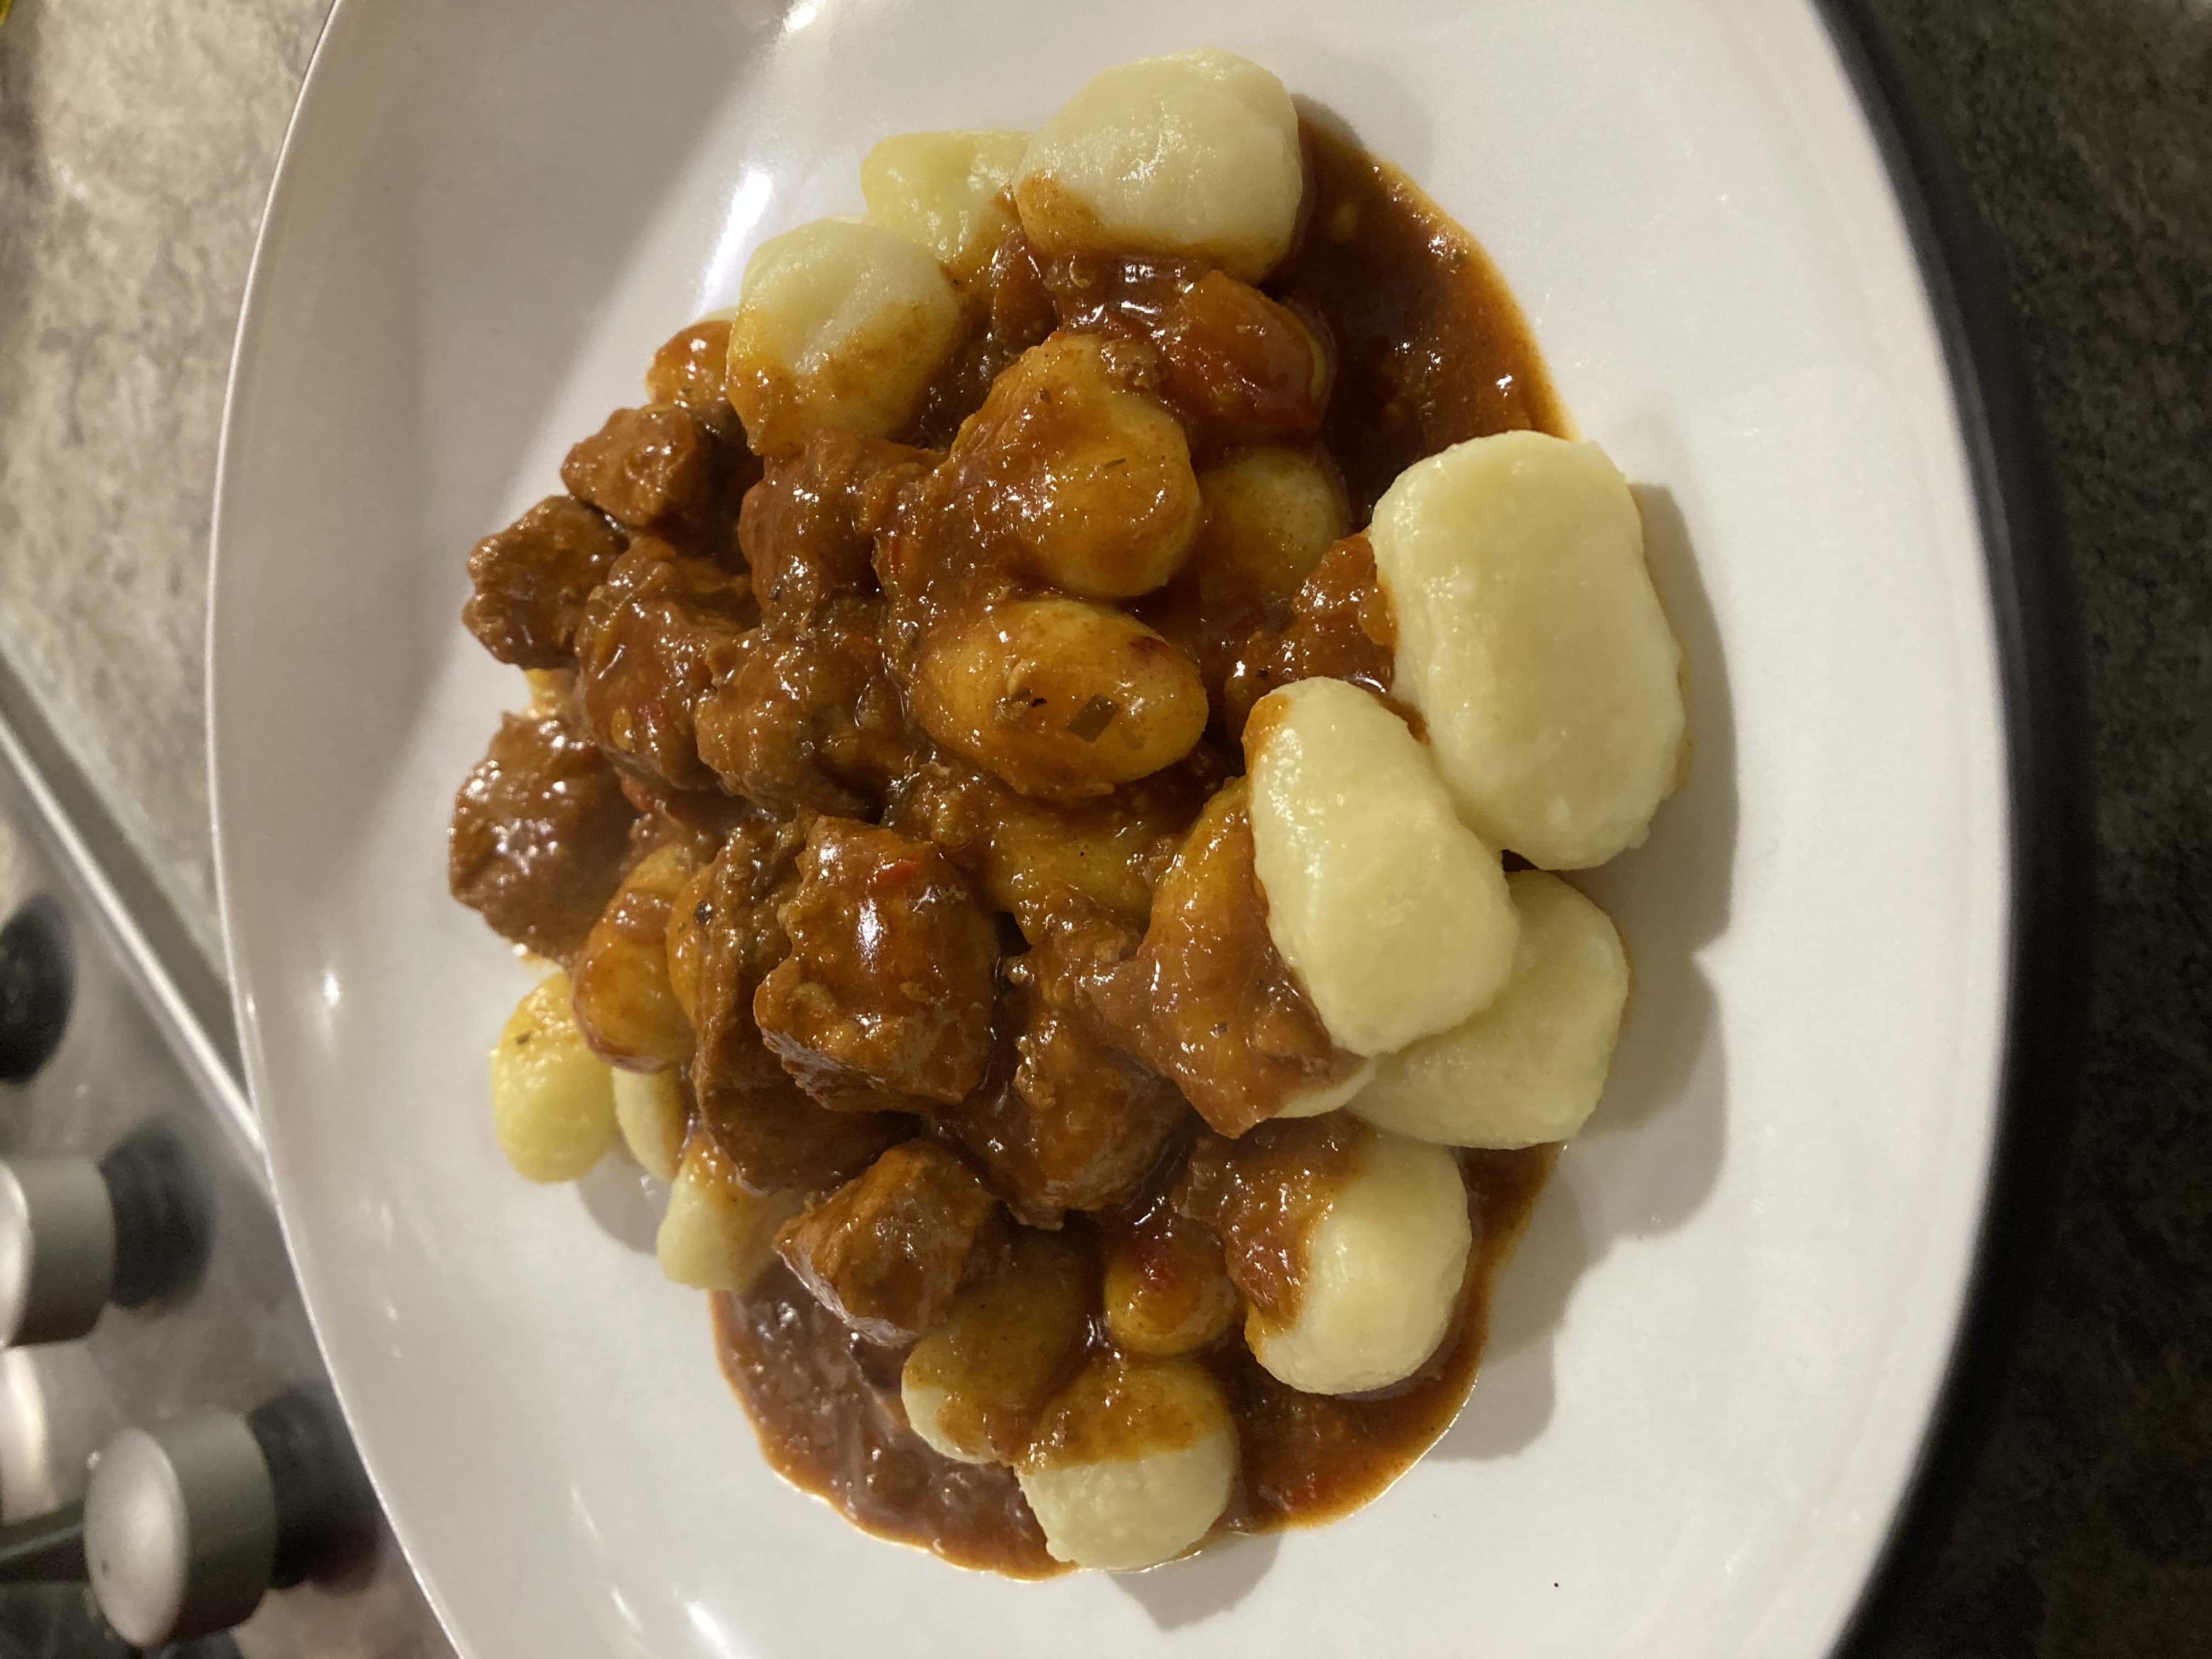 A plate with the finished goulash and some gnocchi